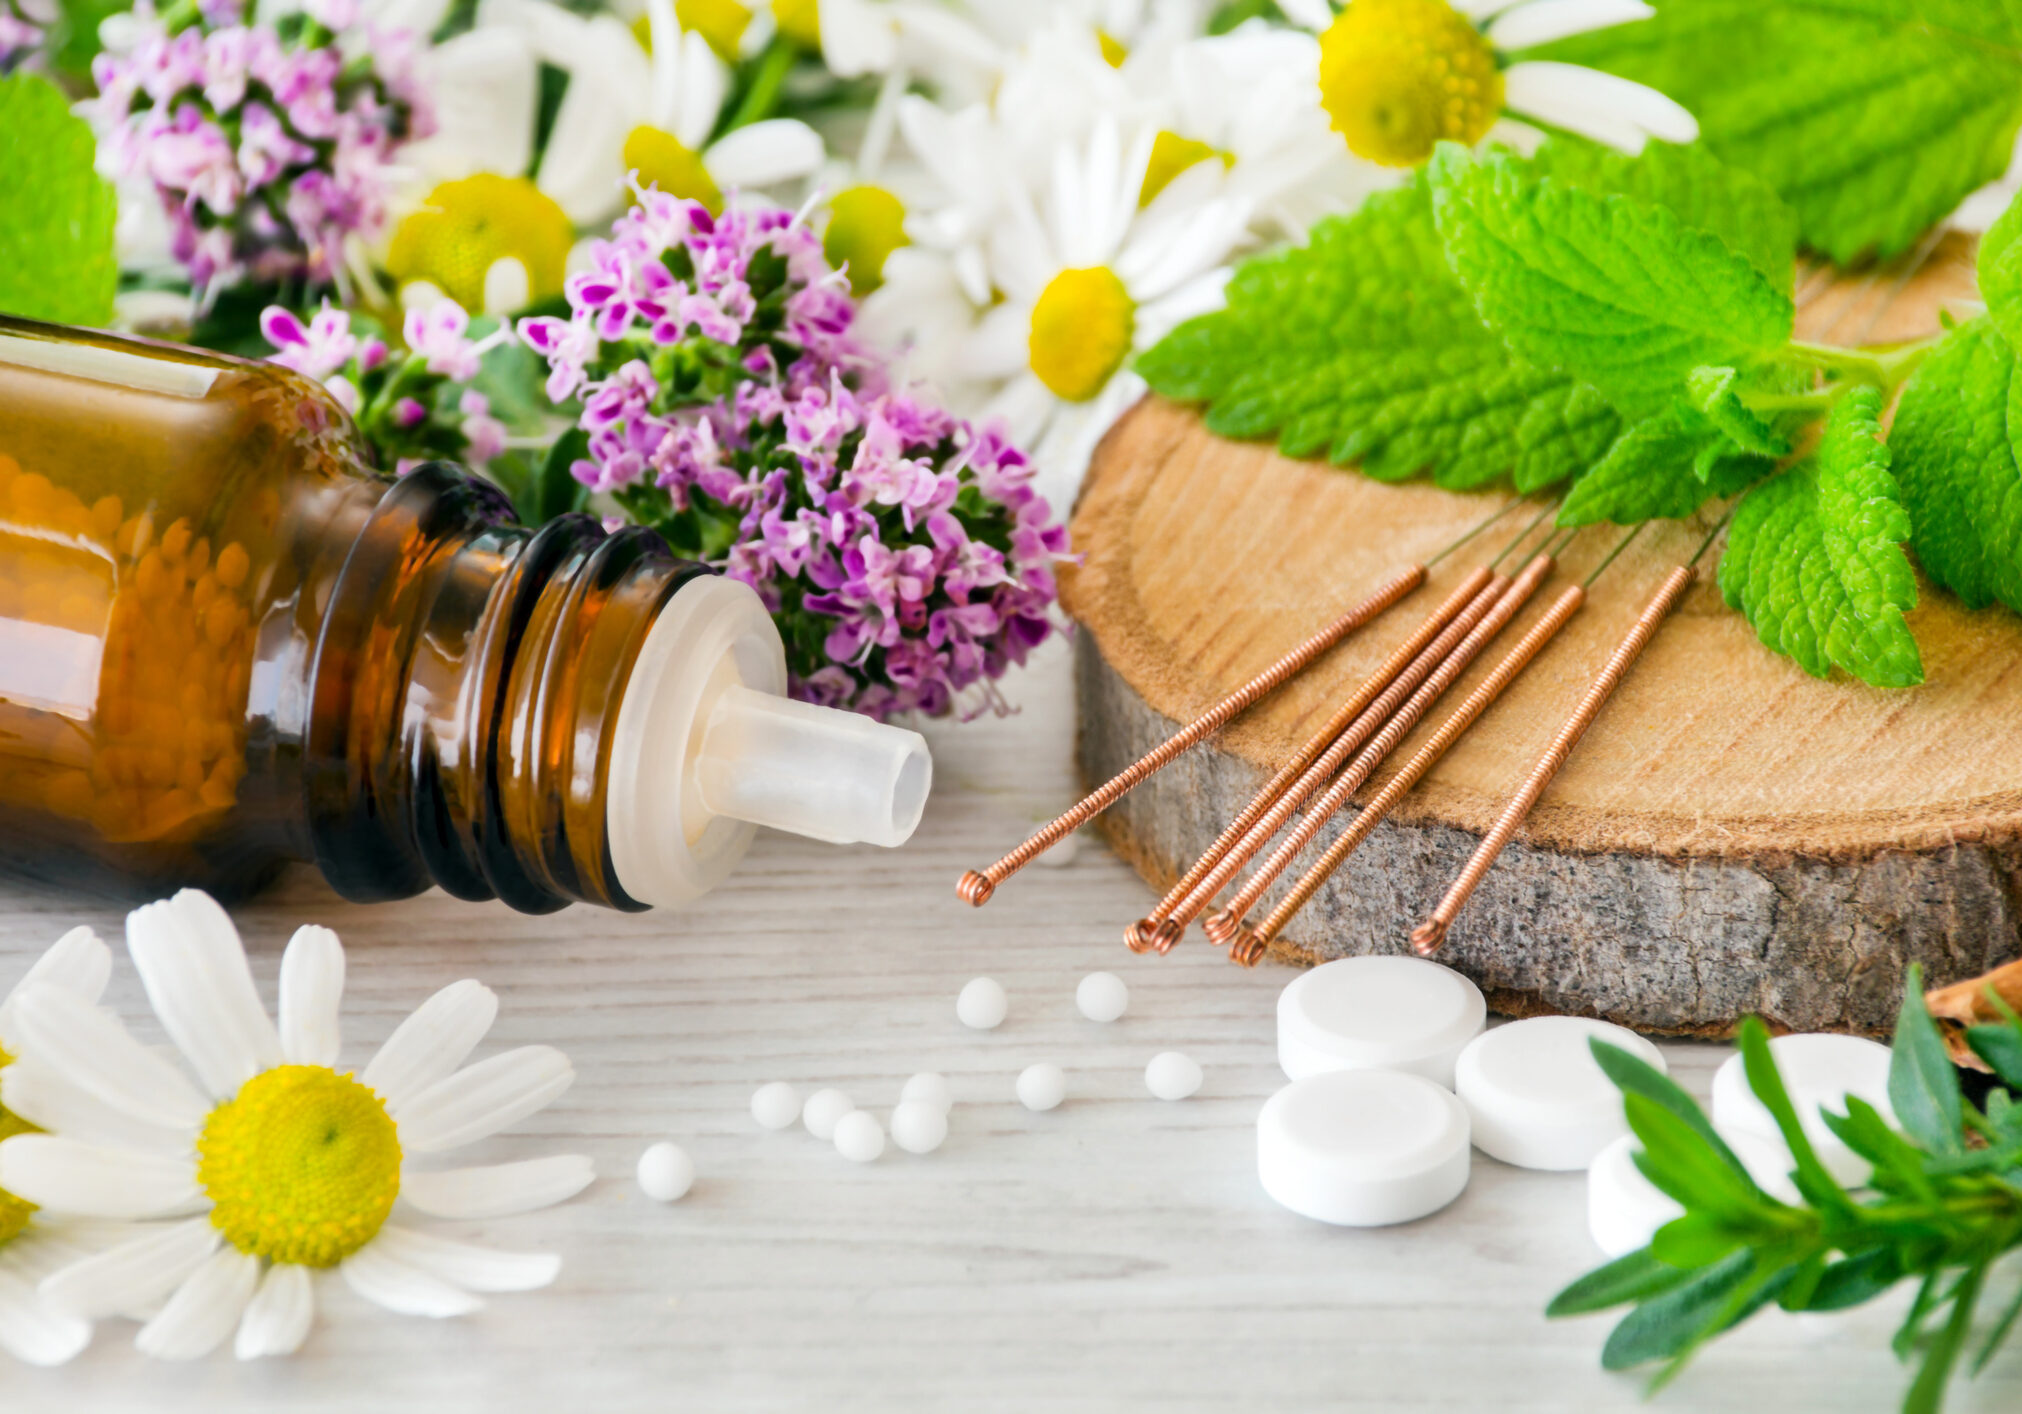 Alternative medicine with acupuncture and globules